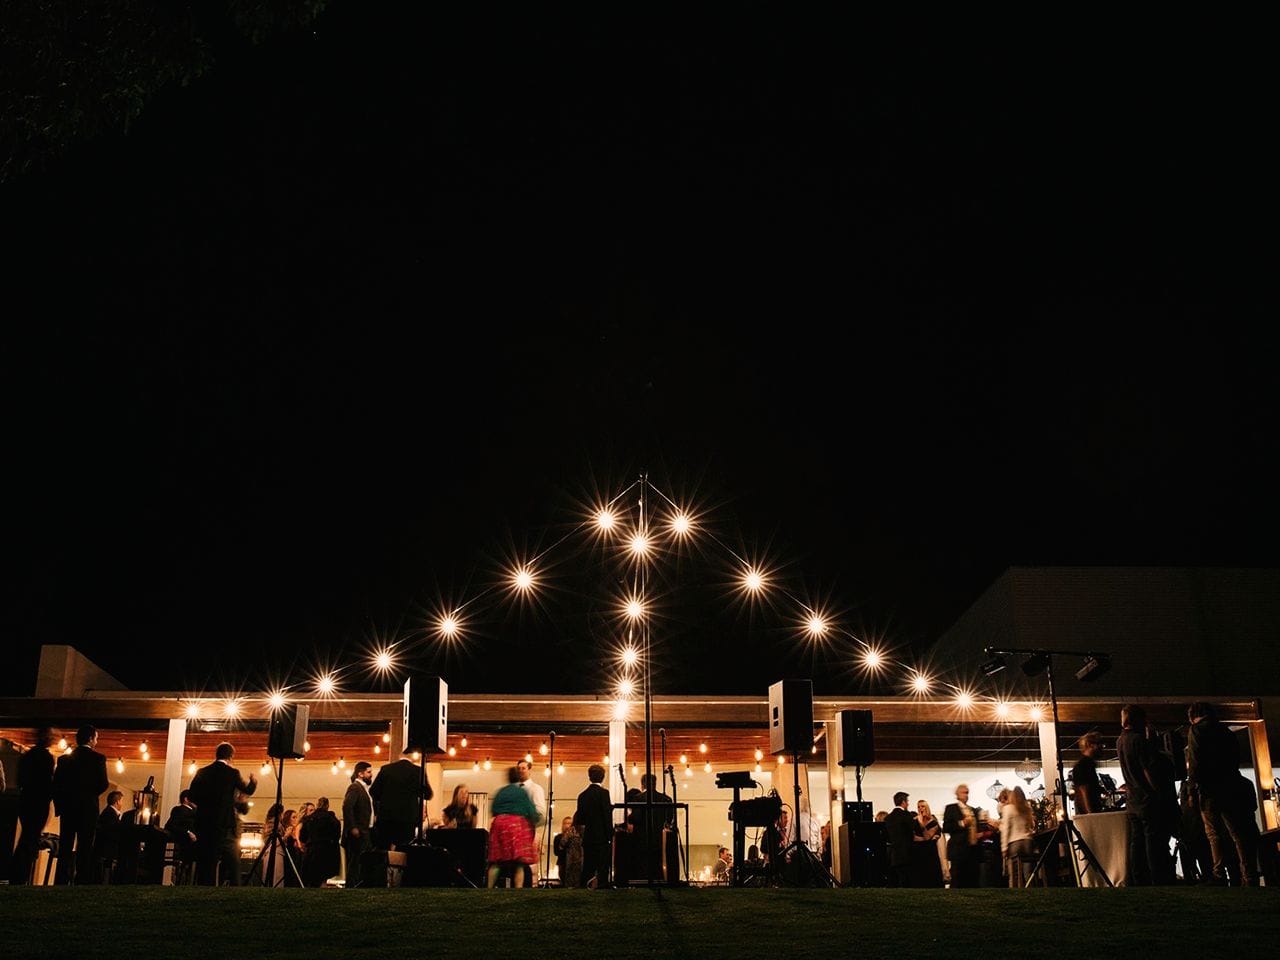 Guests Enjoying The Evening Outside The Function Room With String Lights